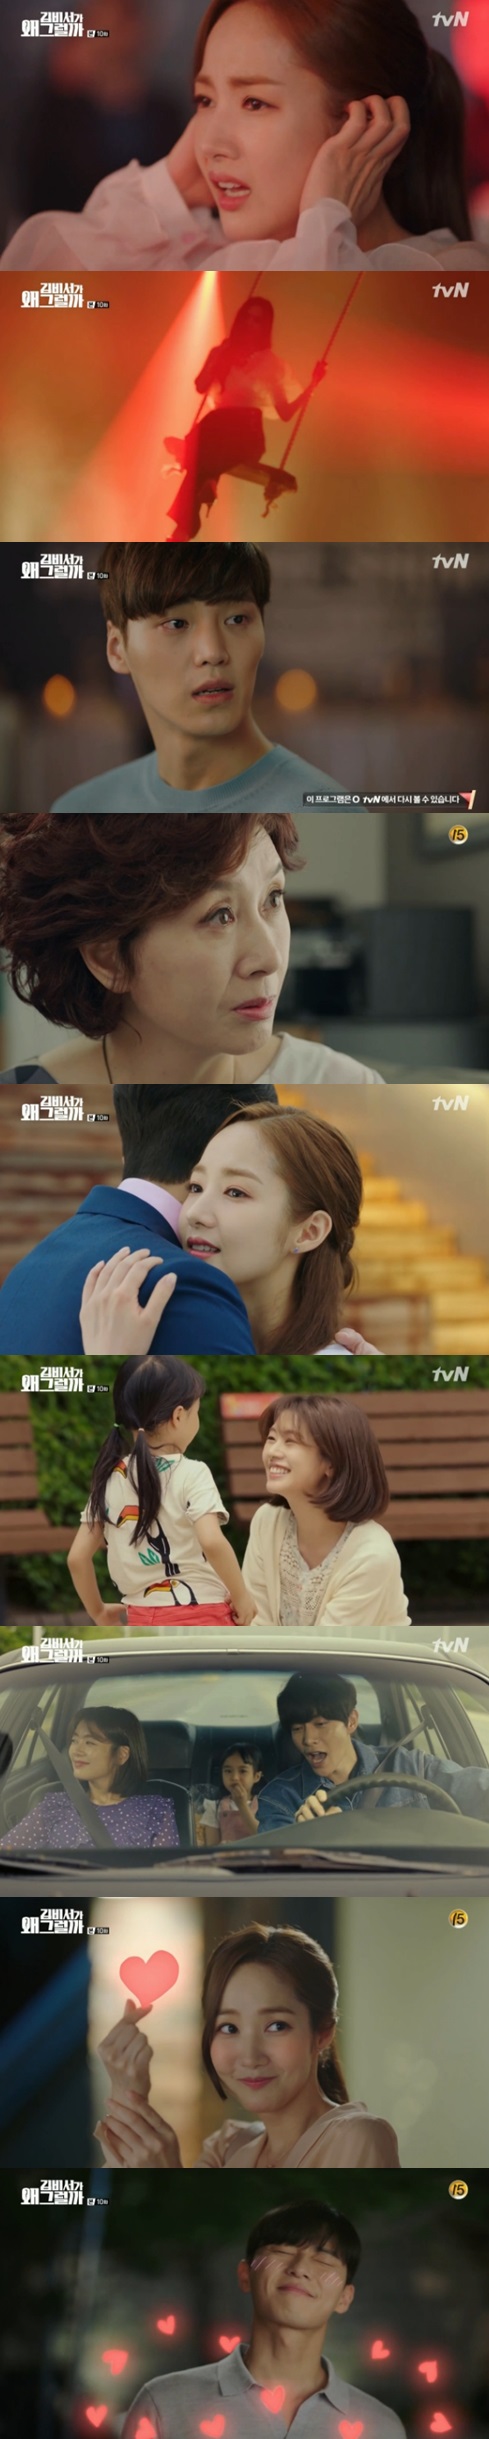 Why is Kim doing it? Actor Park Seo-joon, Park Min-young and Lee Tae-hwan are closer to the truth.In the 10th episode of the cable channel tvN tree drama Why is Secretary Kim doing that (playplayed by Baek Sun-woo, directed by Park Joon-hwa), which was broadcast on the 5th night, Lee Sung-yeon (Lee Tae-hwan), who learned the truth of the day of kidnap 24 years ago, was portrayed.On this day, Kim Mi-so called Lee Yeongjun Sung Hyun brother to Lee Yeongjun, who was sleeping, suspicious of Lee Yeongjun as his brother.Lee Yeongjun replied why but denied he was his brother, saying he was sleeping; Lee Yeongjun then grappled and said, You dont need to know.I dont want to make you cry again, he told himself.Kim Mi-so did not bow, but went to Lee Yeongjuns mother, Choi (Kim Hye-ok), and asked, but Choi also denied and avoided the truth.Lee Sung-yeon, who happened to meet Lee Sung-yeon, asked about the impression of a girl who was a child, but Lee Sung-yeon said, I do not think I can remember.I wonder if it is an unconscious self-defense. However, Kim Mi-so saw the pictures of Lee Sung-yeon and Lee Yeongjun as a child and was convinced that brother and Lee Yeongjun were the same person and decided to pretend not to know himself.Kim Mi-so, who visited the house with Lee Yeongjuns invitation, was ashamed for a while and shed tears when she saw the wound on Lee Yeongjuns ankle.At this time, when my sisters continued to judge Lee Yeongjun as a selfish person, Kim Mi-so cried, saying, Our vice chairman is not such a person.Lee Yeongjun, who saw this, laughed at the mistake, saying, Is there a lot of opposition to crying? I am so perfect that I am burdened.My sisters seem to be worried about us a lot, but I will make all of them disappear soon, he said.The two continued their love affair: Kim Mi-so flicked his finger heart, while Lee Yeongjun pretended to pick it up to the moon in the sky.He also played an Actor on how to look good to his family from Park Yoo-sik (Kang Ki-young).Lee Yeongjun went to Jebudos guest house where Gearko Kim Mi-so spends time with her sisters every year.And Lee Yeongjun announced that he was dating Kim Mi-so and told him not to worry, but his older sister drew a line saying it was uncomfortable.Lee Yeongjun challenged Lee Yeongjun to the Infinite Refill soy sauce that he had not eaten normally, but his big sister continued to stimulate Lee Yeongjun.Lee Yeongjun said, There are more people who do it, I will pick up the main event and go in. Then I ate constantly and eventually pretended.Kim Mi-so went on to point to her sisters rudeness for cursing Lee Yeongjun and suggested a clam-capping showdown to say her wish to do not hate the vice president.After Lee Yeongjuns struggle, the smile team won and Lee Yeongjun said, Please watch all the time. The sisters also opened their hearts to Lee Yeongjun.The sisters explained why the Smiley family came to Jebudo every year and spent time.As a child, my father (Lee Min-ki) and my mother (Jung So-min) and the family who were playing at sea vowed to go to the sea every year for my mothers birthday and to keep my promise.Smile had released her childhood memories to her mother, who had a sudden bad health and had a lively smile and a lively time until the end, despite her sick body.If you have a pain that is hard to say, I would like you to tell me someday. I will be next to you forever, he said.And Choi told Lee Sung-yeon, You are not the one who was kidnapped. 24 years ago, he told all the truth of the day of the kidnap incident.However, Lee Sung-yeon denied this fact and headed to the event where Lee Yeongjun is proceeding.And I cried to Kim Mi-so, Do you think my memory is wrong?Among them, Kim Mi-so saw a woman in the event hall and recalled and fainted a woman in the Kidnap case 24 years ago.